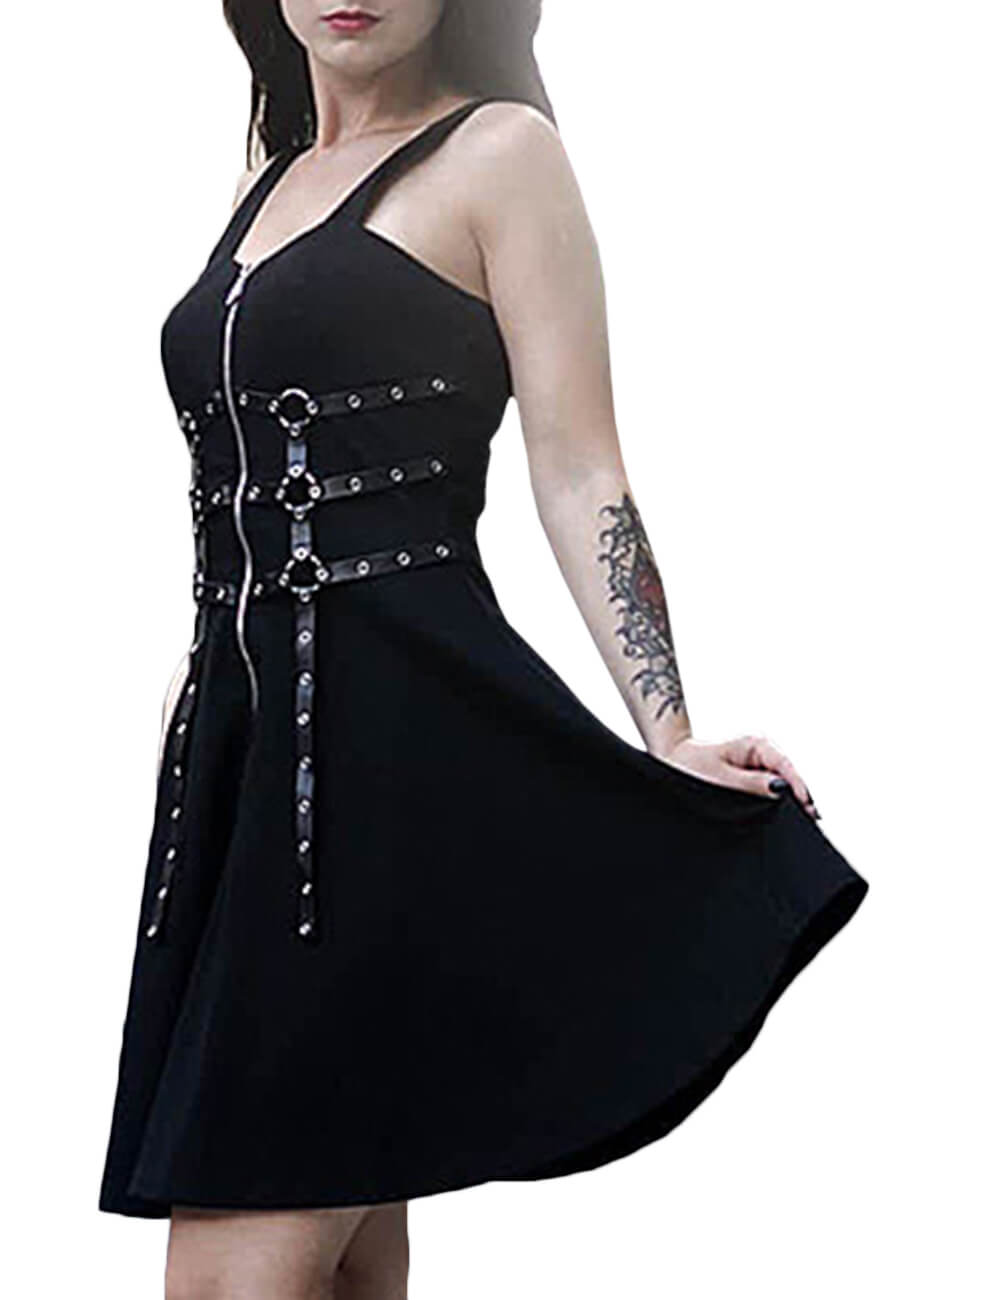 Cool Black Backless Zipper Up Pleated Harness Goth Strap Dresses Leather Whipped Gothic Punk Dress